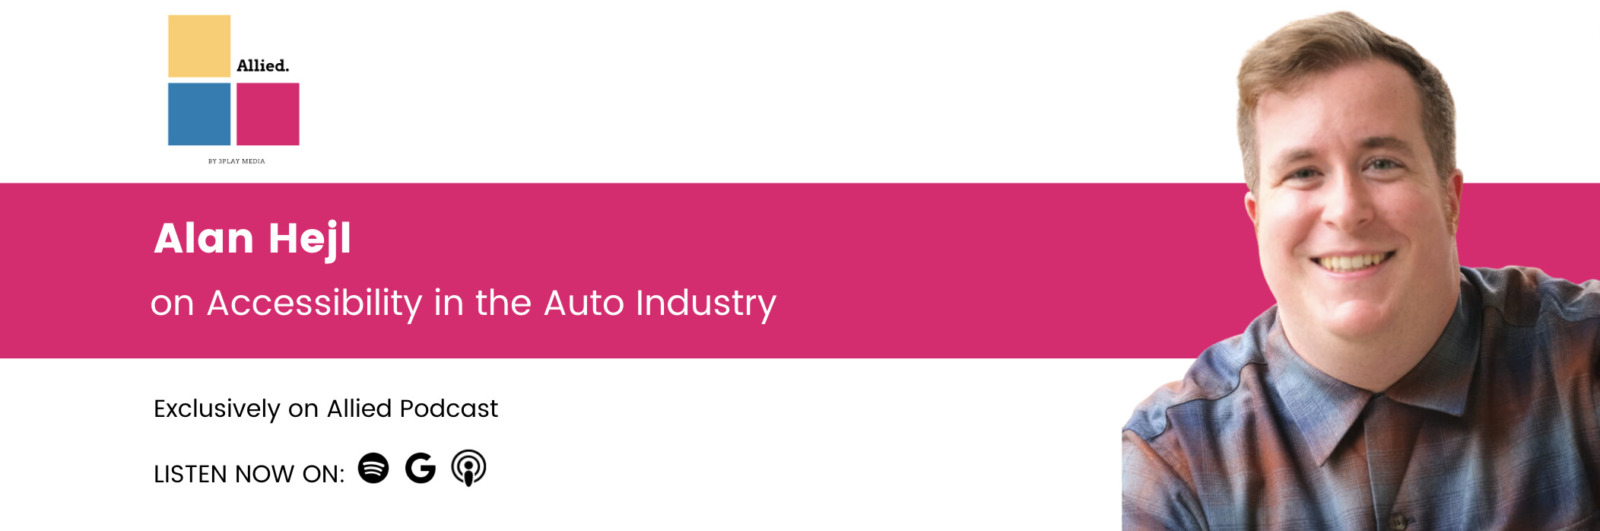 Alan Hejl on Accessibility in the Automotive Industry. Exclusively on Allied Podcast. Listen now on Spotify, Apple Podcasts, or Google Podcasts. #AlliedPod